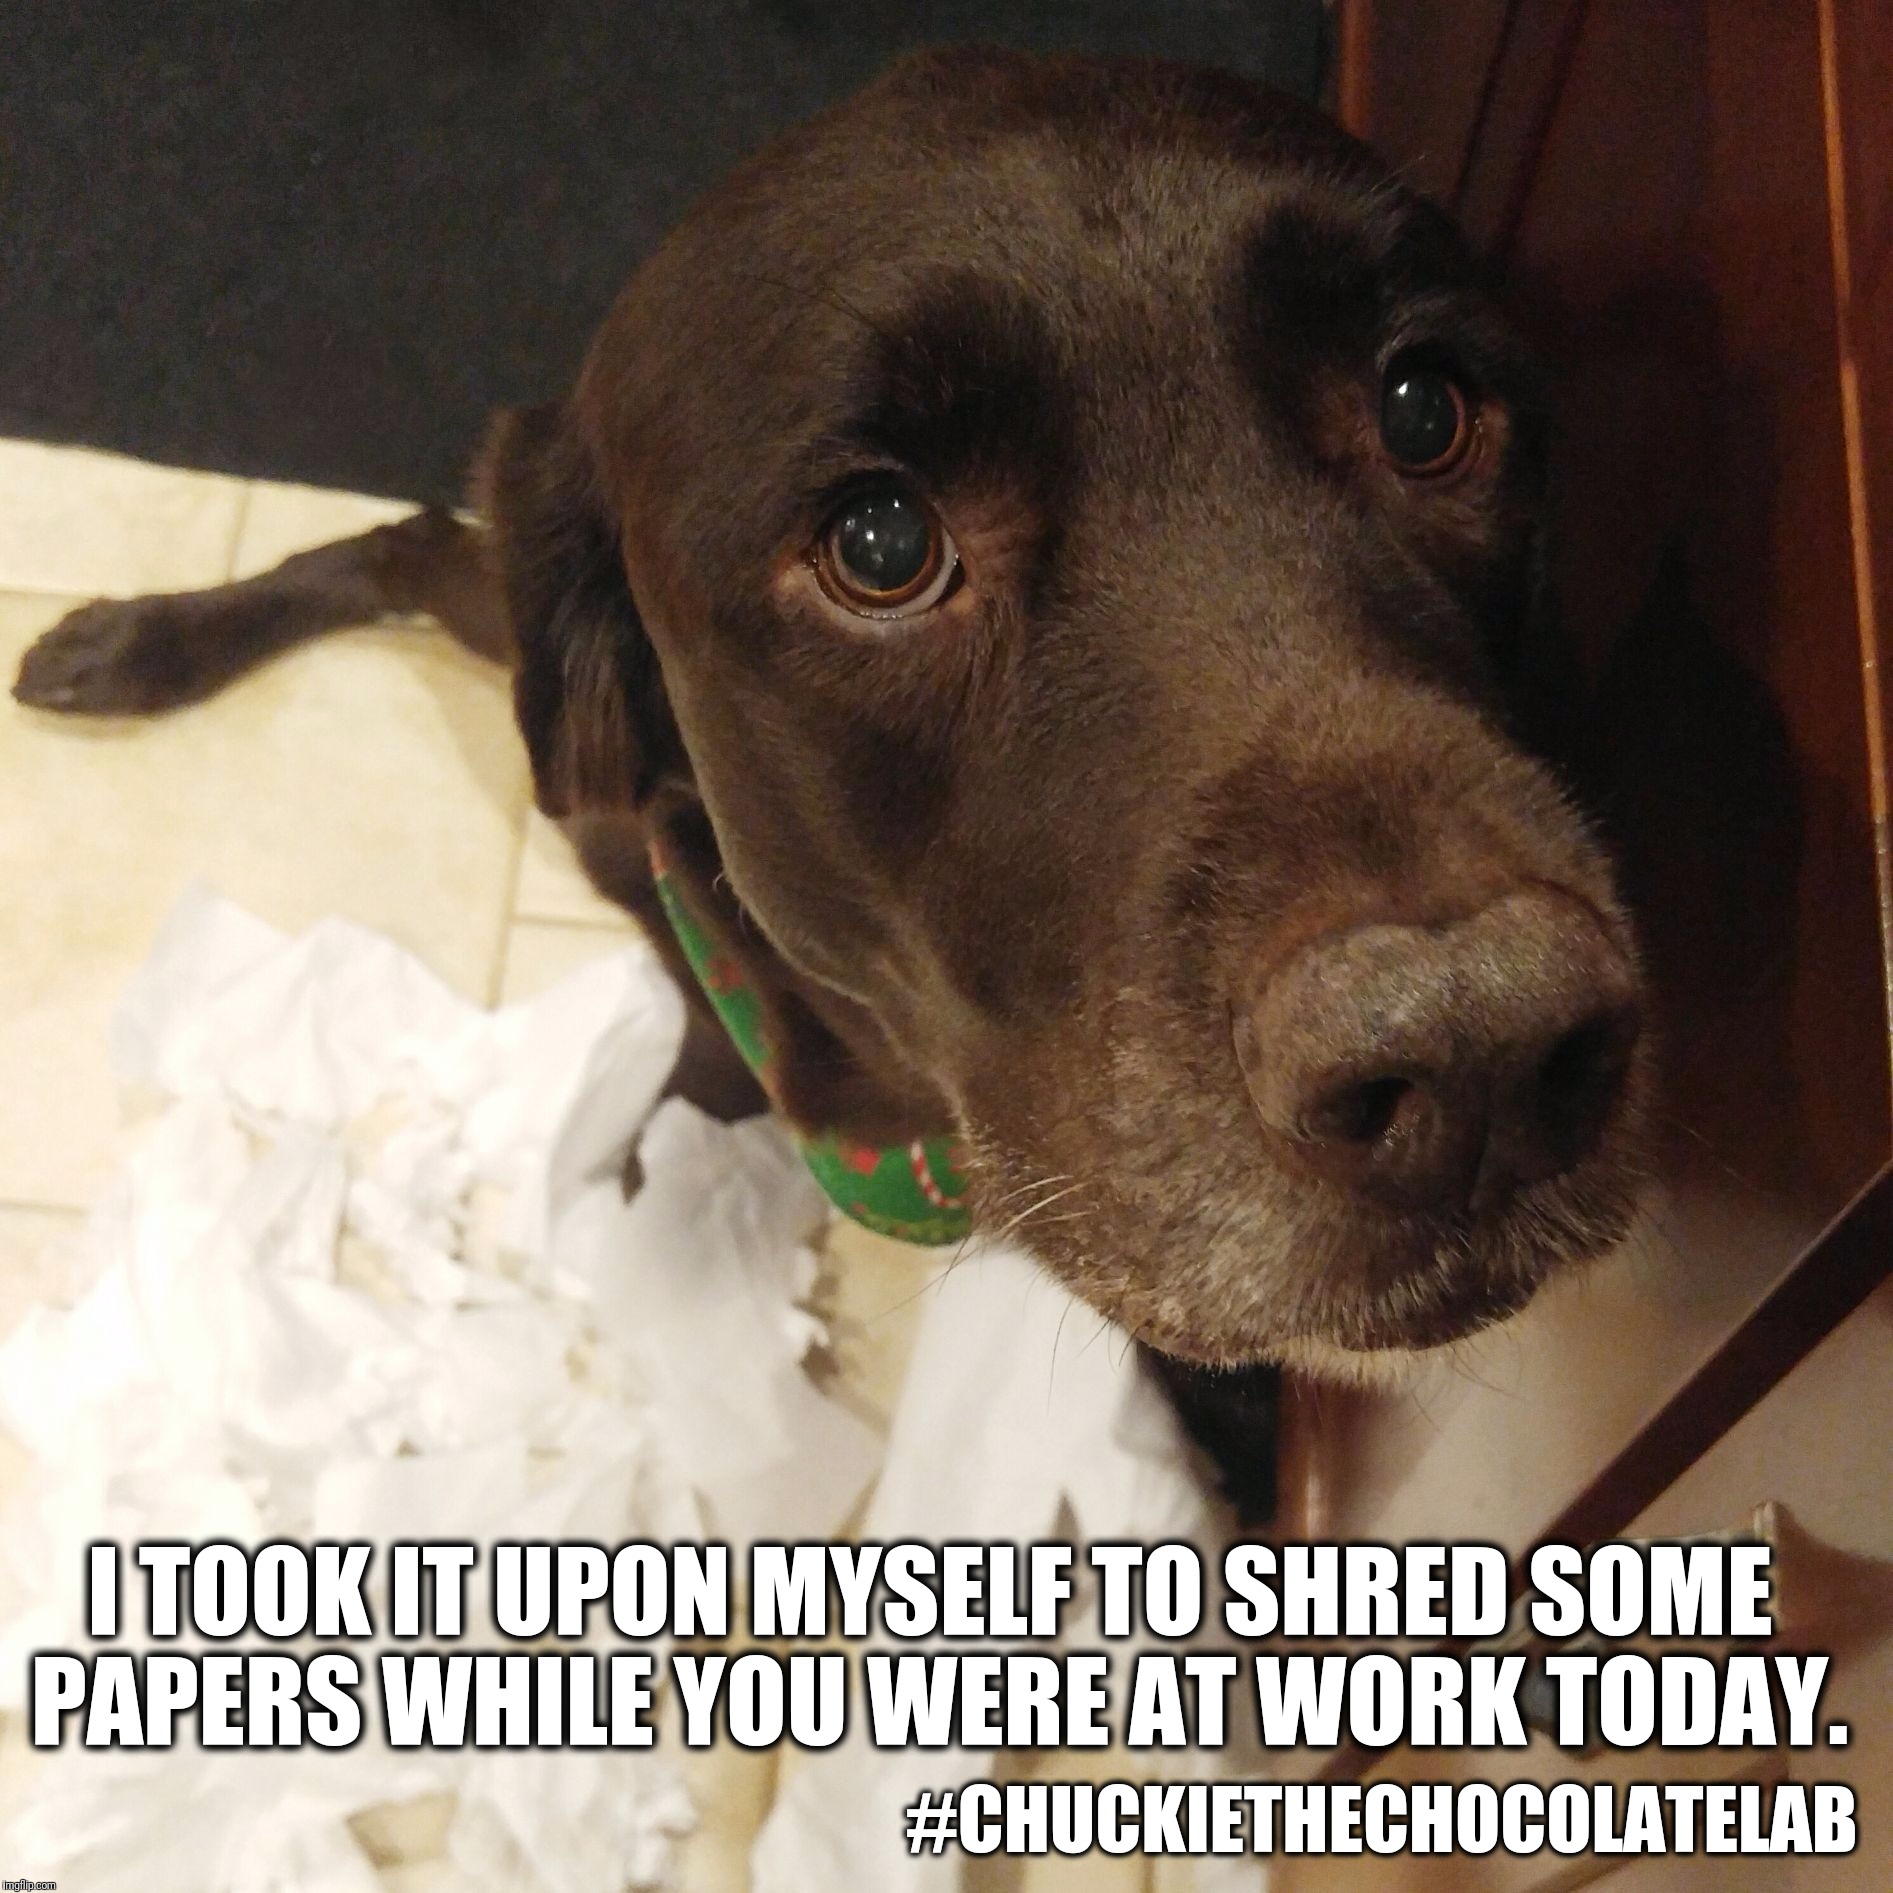 I took it upon myself to shred some papers while you were at work today.  | I TOOK IT UPON MYSELF TO SHRED SOME PAPERS WHILE YOU WERE AT WORK TODAY. #CHUCKIETHECHOCOLATELAB | image tagged in chuckie the chocolate lab,dogs,funny dogs,paper shredder,memes,labrador | made w/ Imgflip meme maker